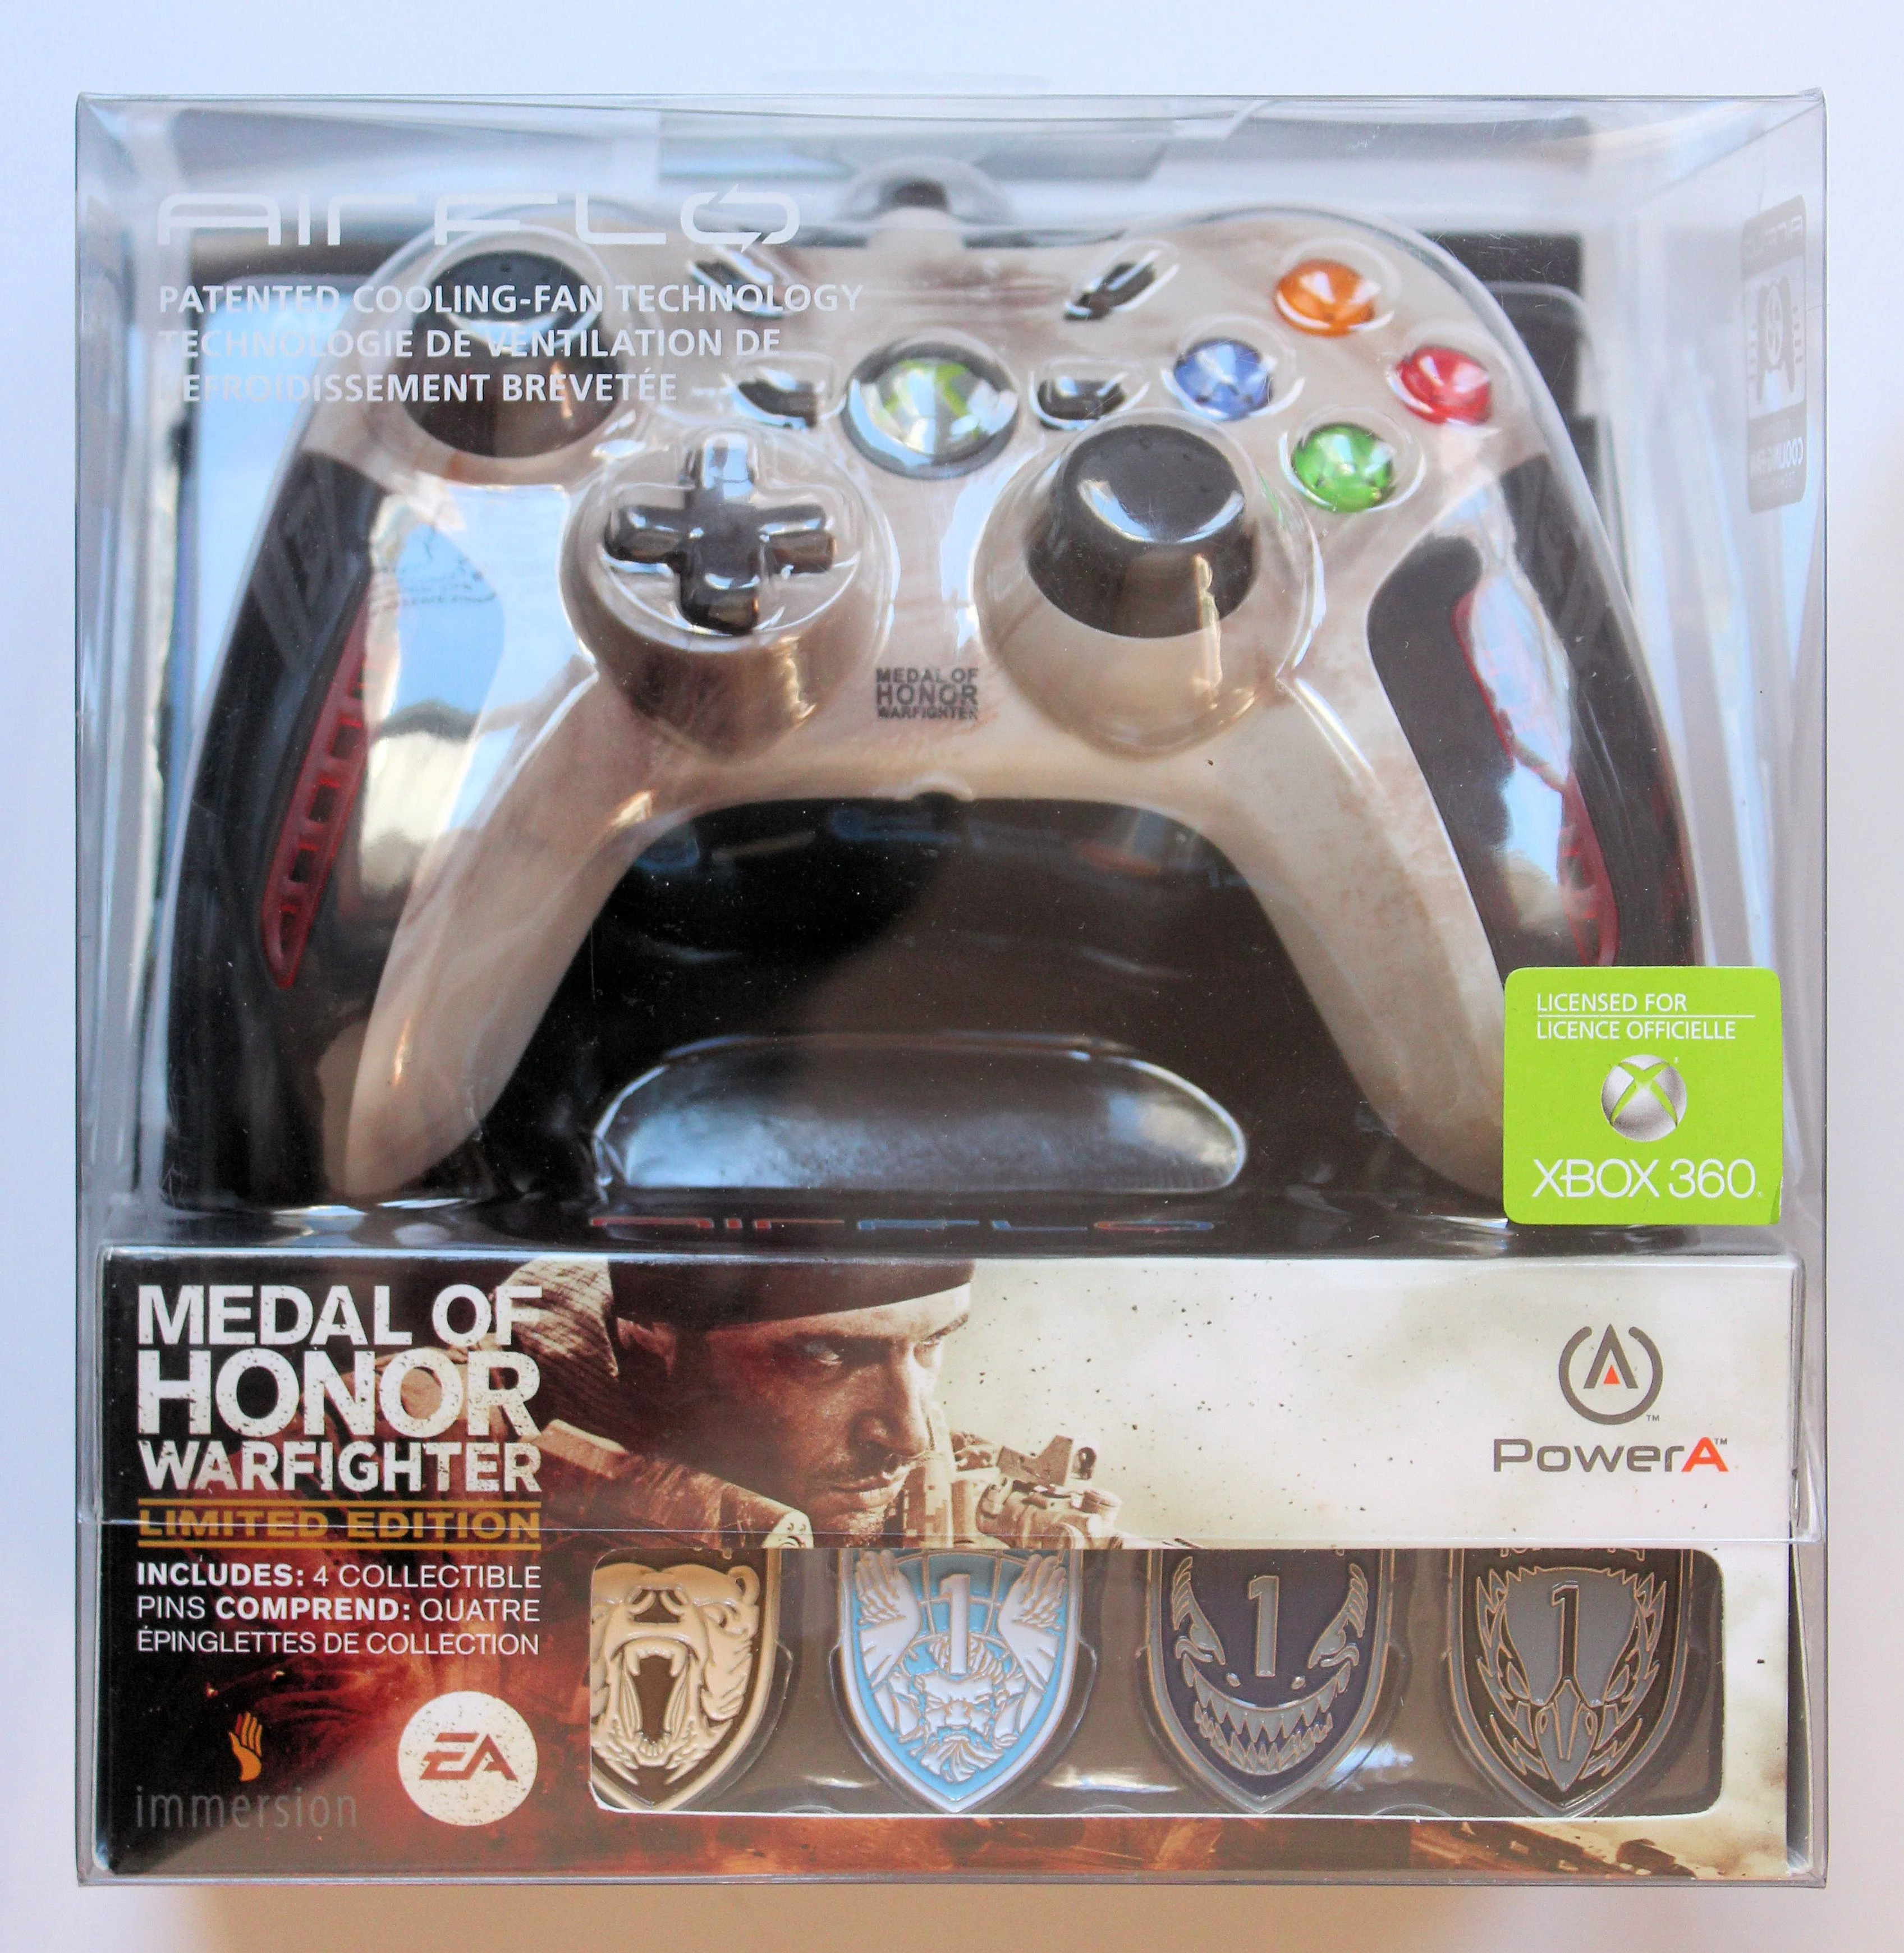  PowerA Xbox 360 Medal of Honor Warfighter Controller